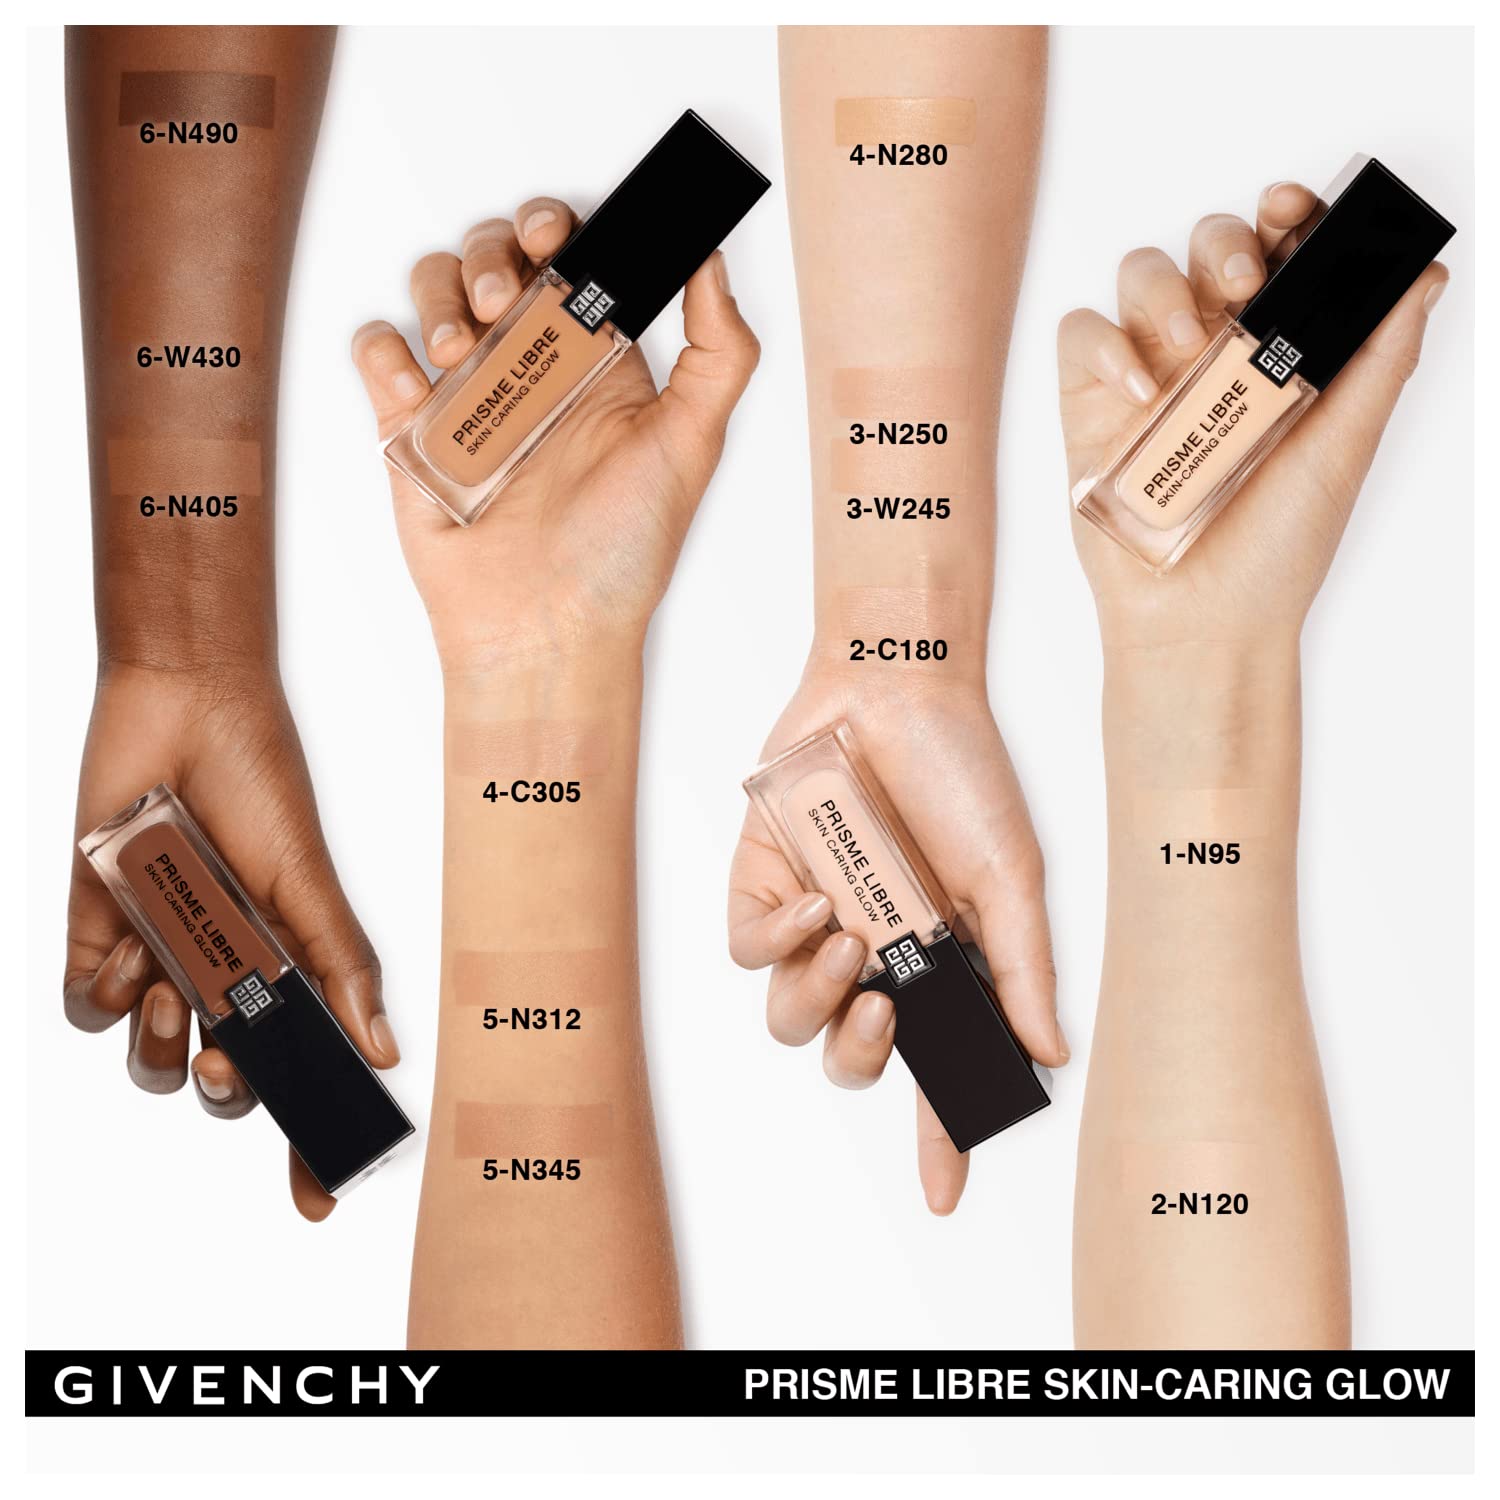 Prisme Libre Skin-Caring Glow Foundation - 2-N120 by Givenchy for Women - 1 oz Foundation